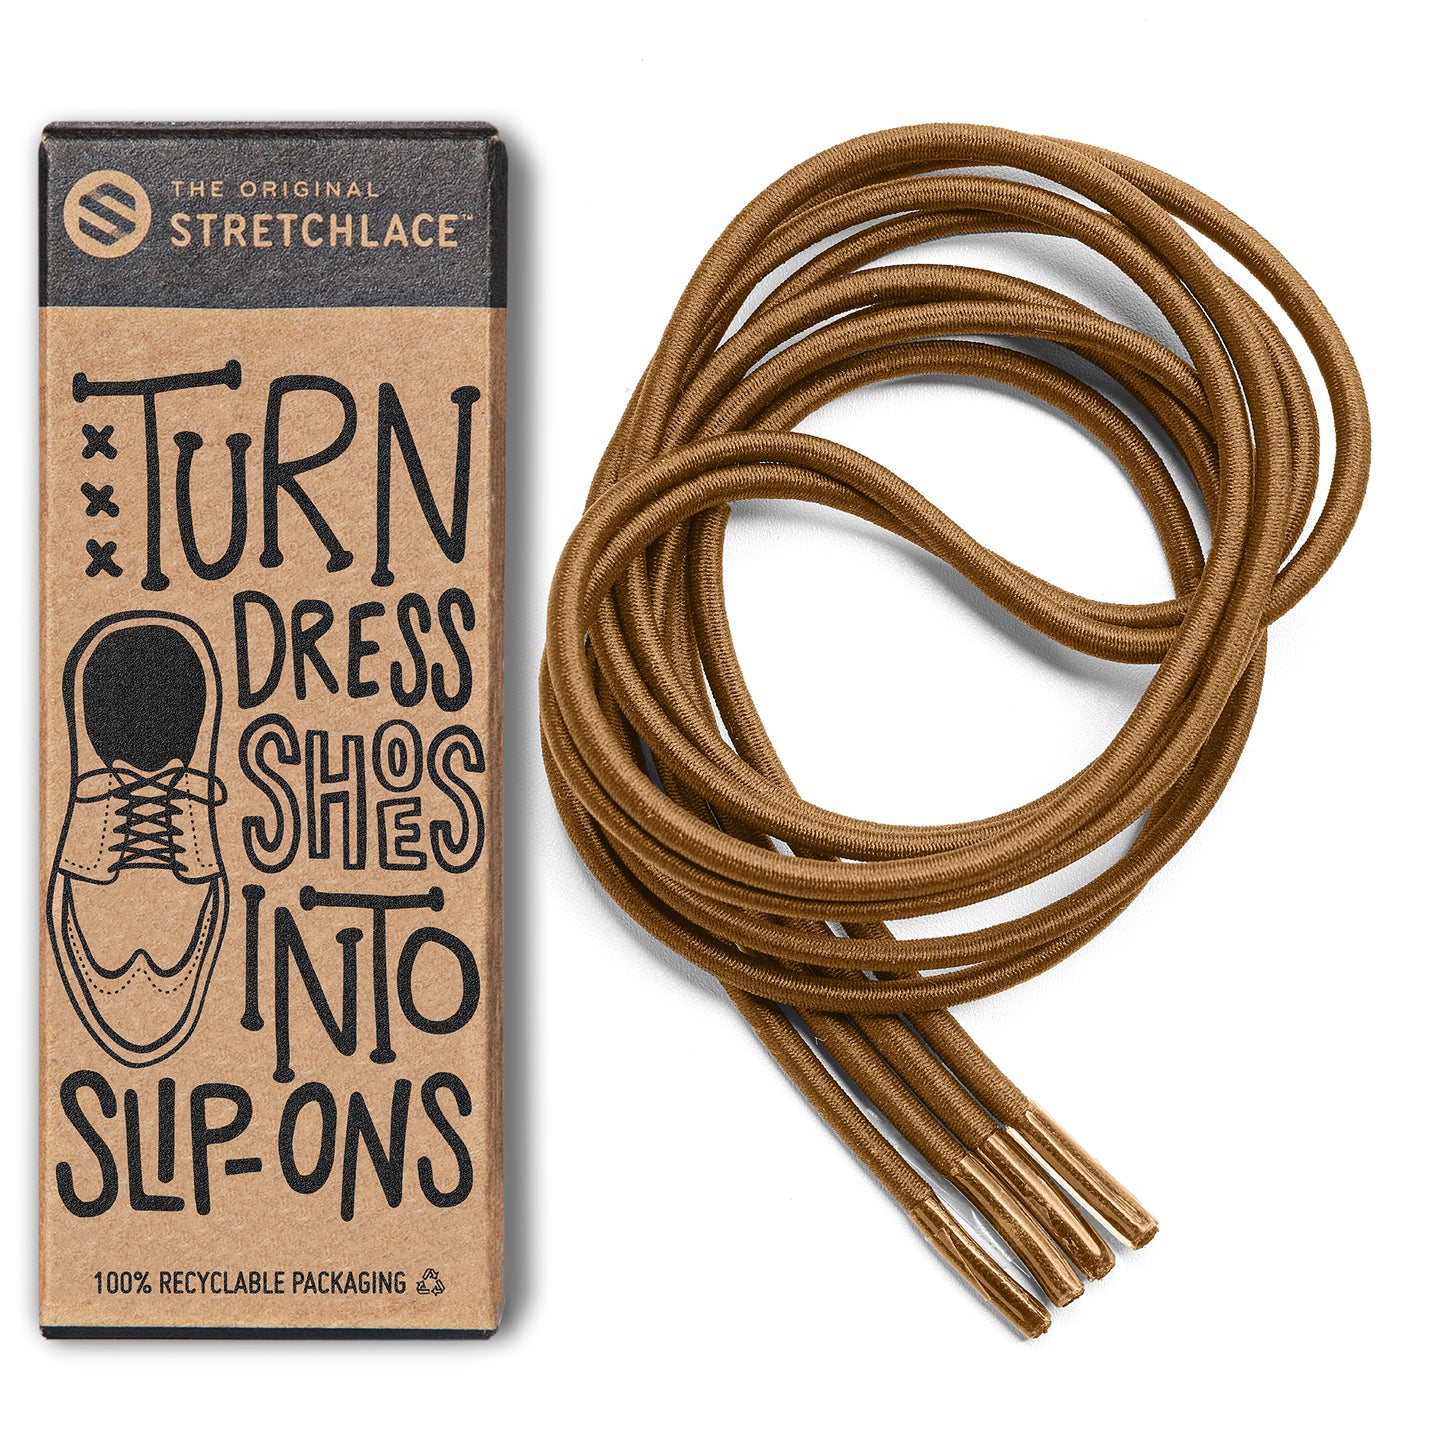 Light Brown Round Elastic Dress Shoe Laces – The Original Stretchlace